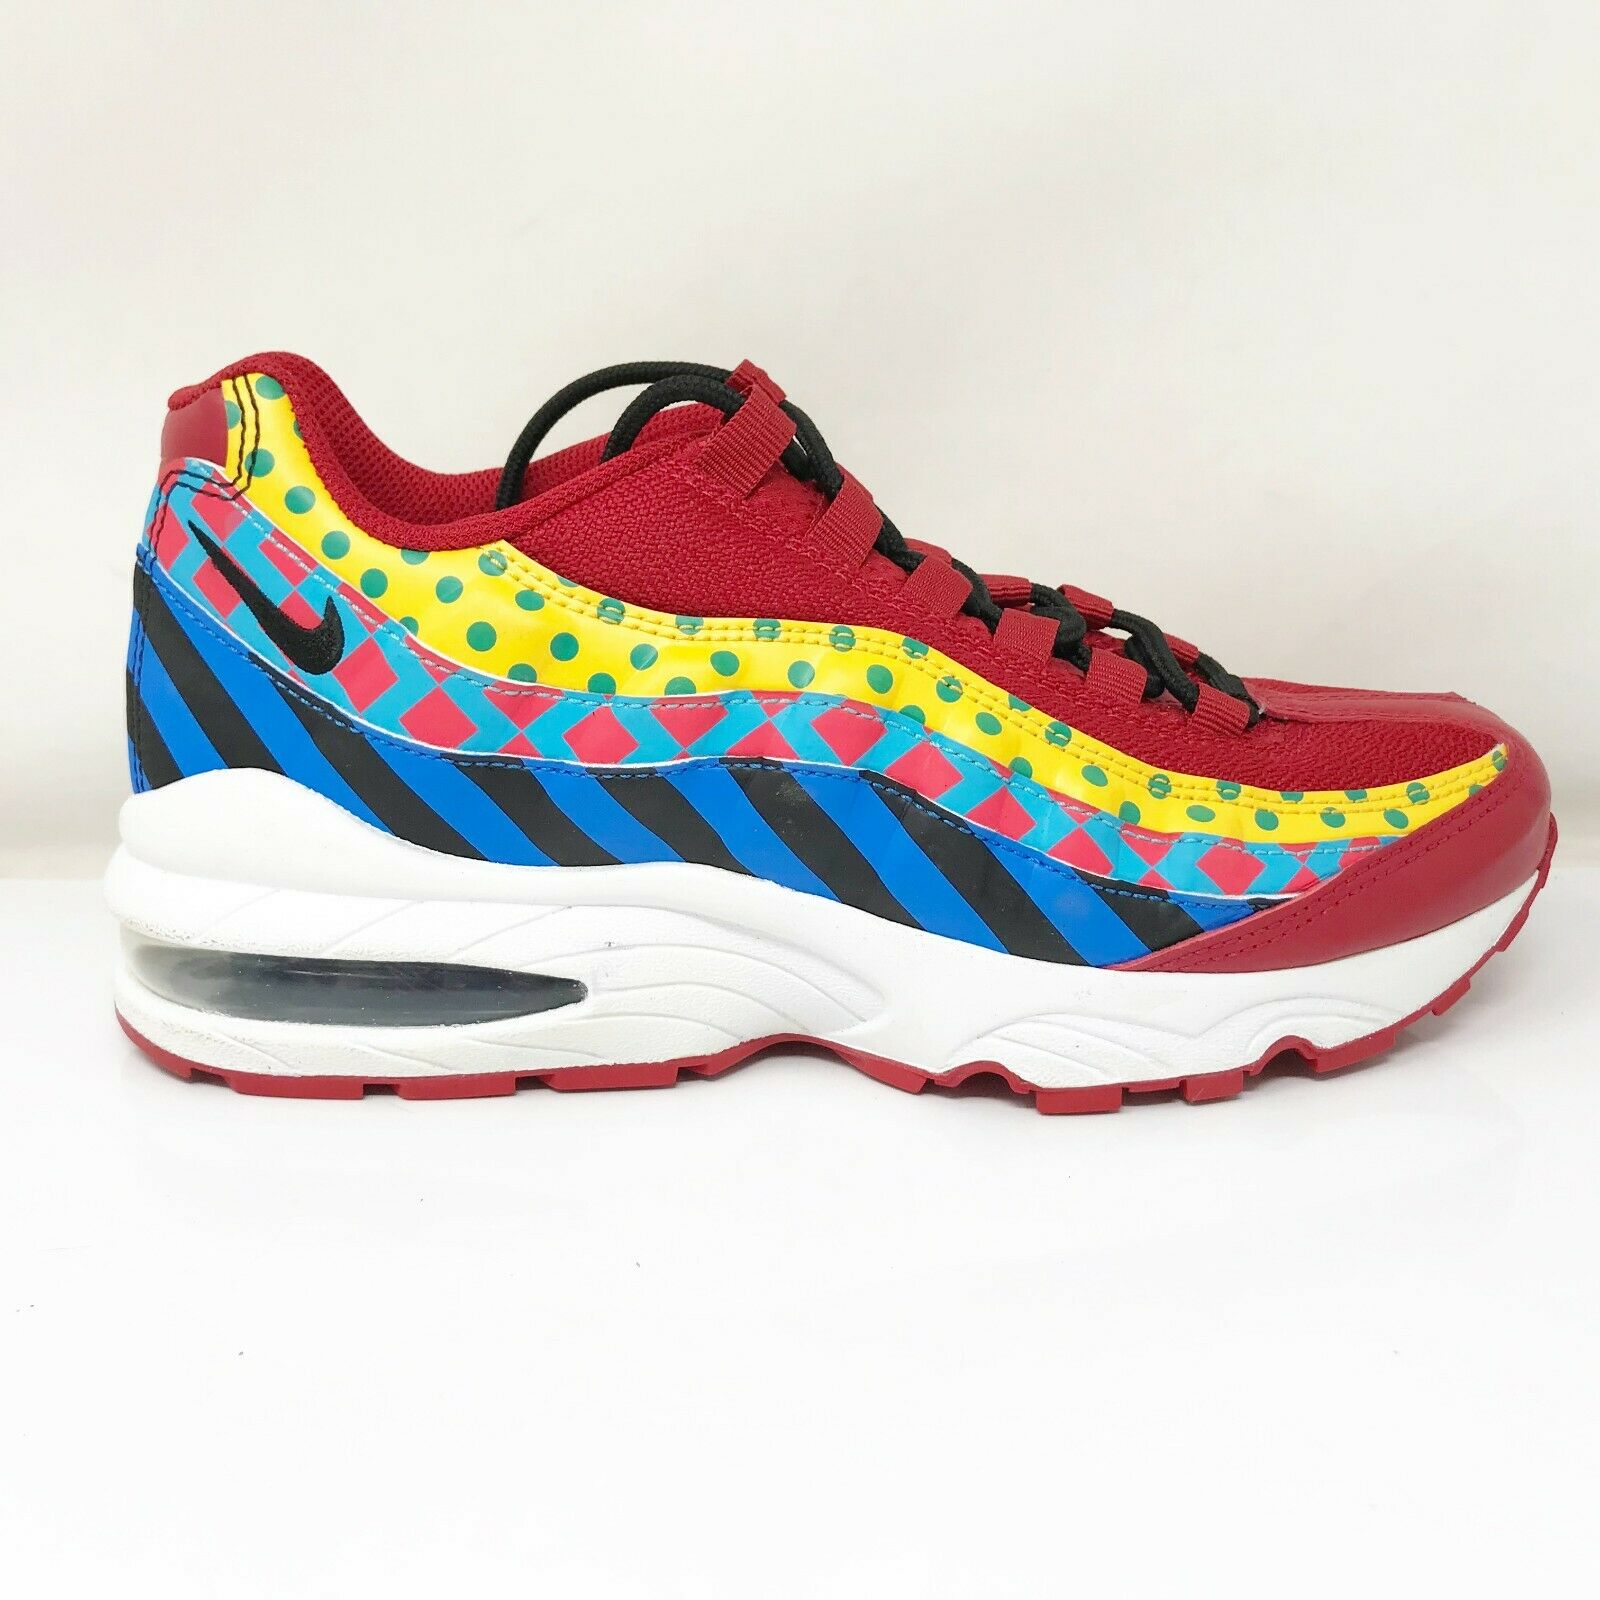 Nike Boys Air Max 95 CI4422-600 Multicolor Running Shoes Lace Up Low Top Size 6Y